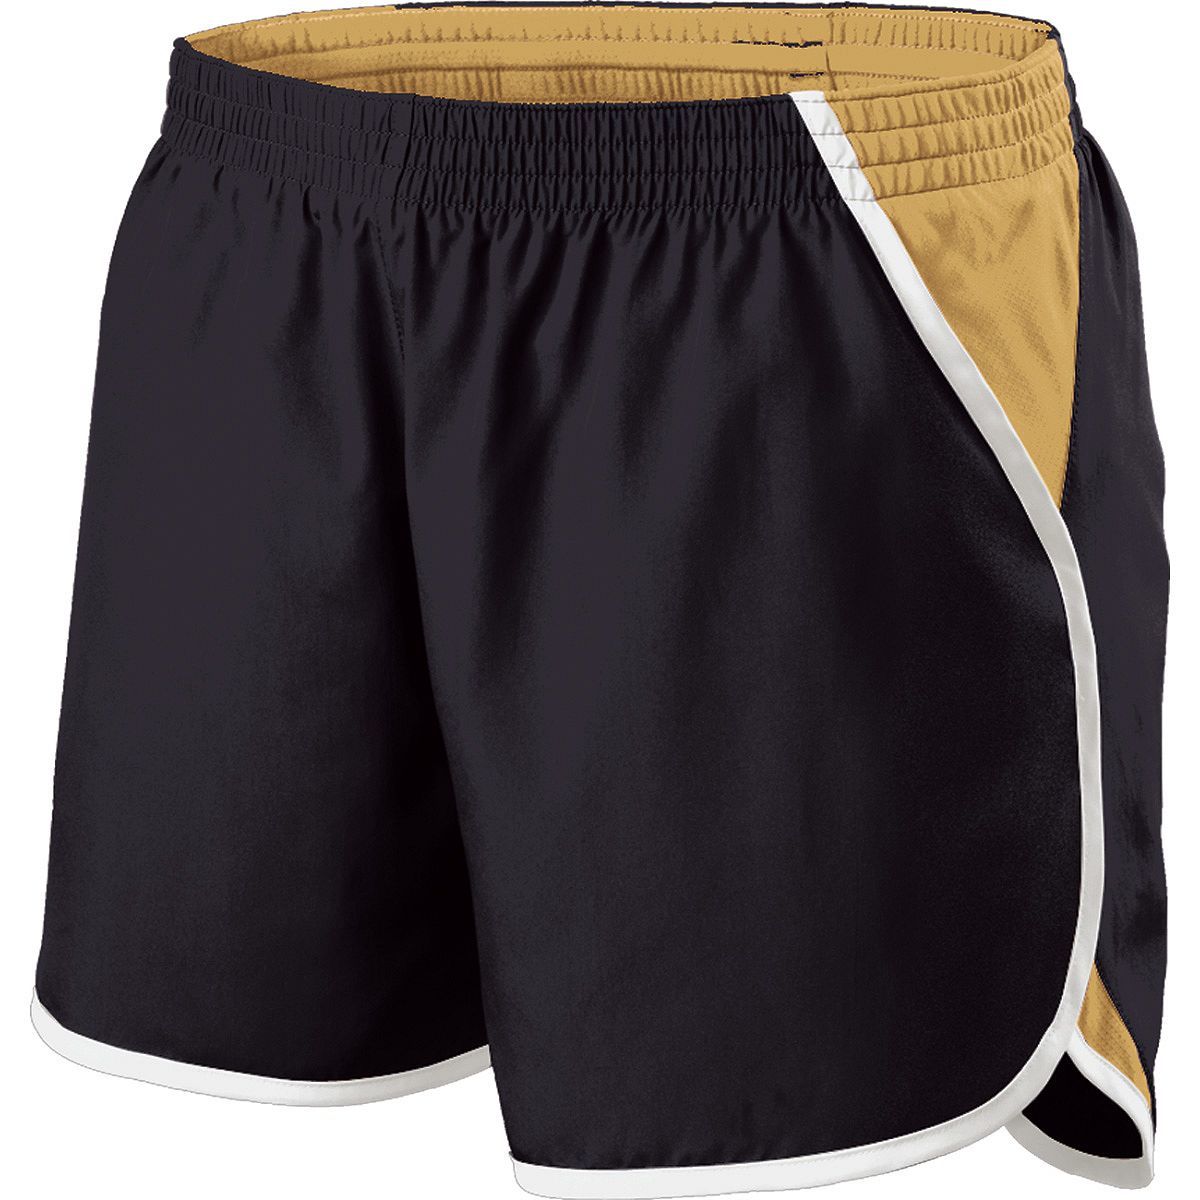 Holloway Energize Shorts in Black/Vegas Gold/White  -Part of the Ladies, Ladies-Shorts, Holloway product lines at KanaleyCreations.com